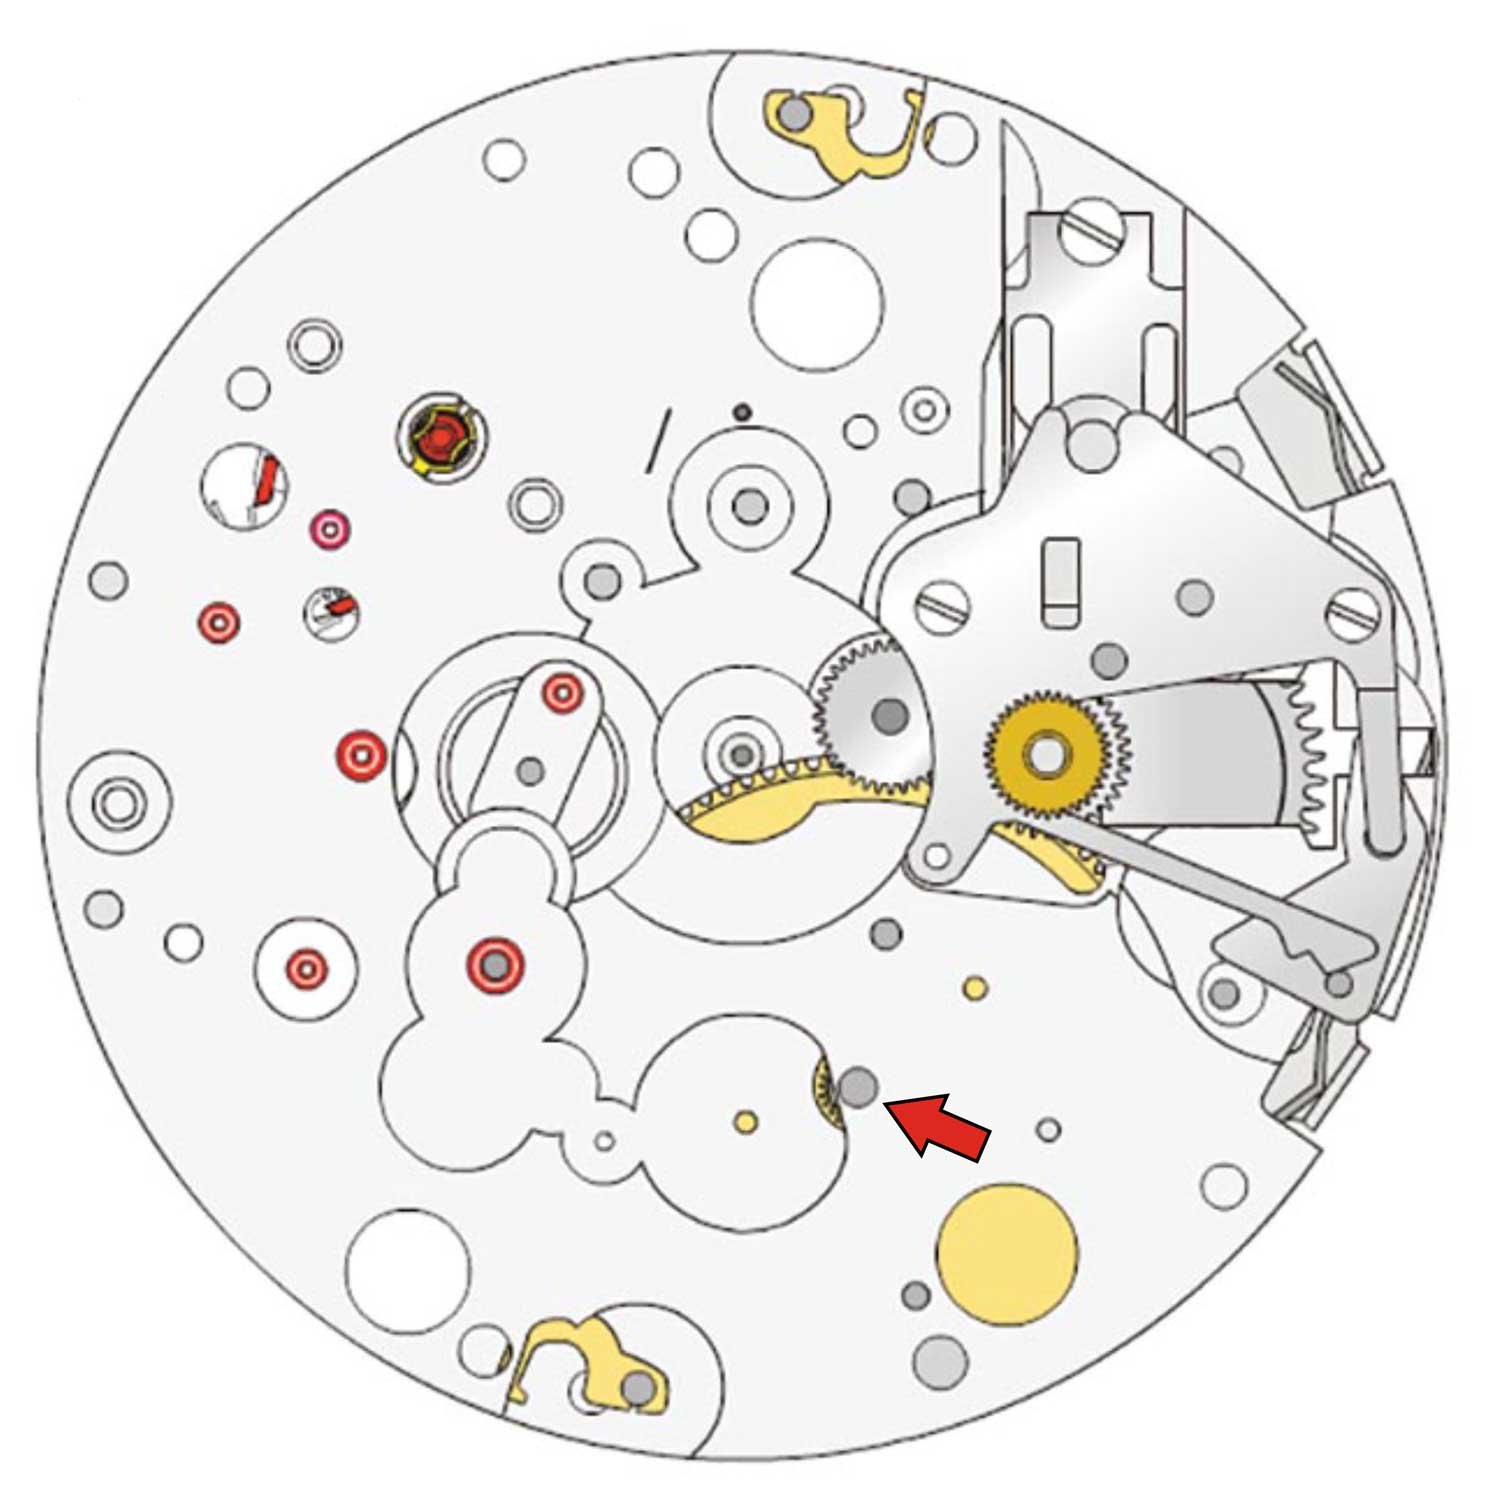 The chronograph hour wheel is set in an unjeweled hole and driven by a pinion on the barrel arbor, as indicated by the red arrow